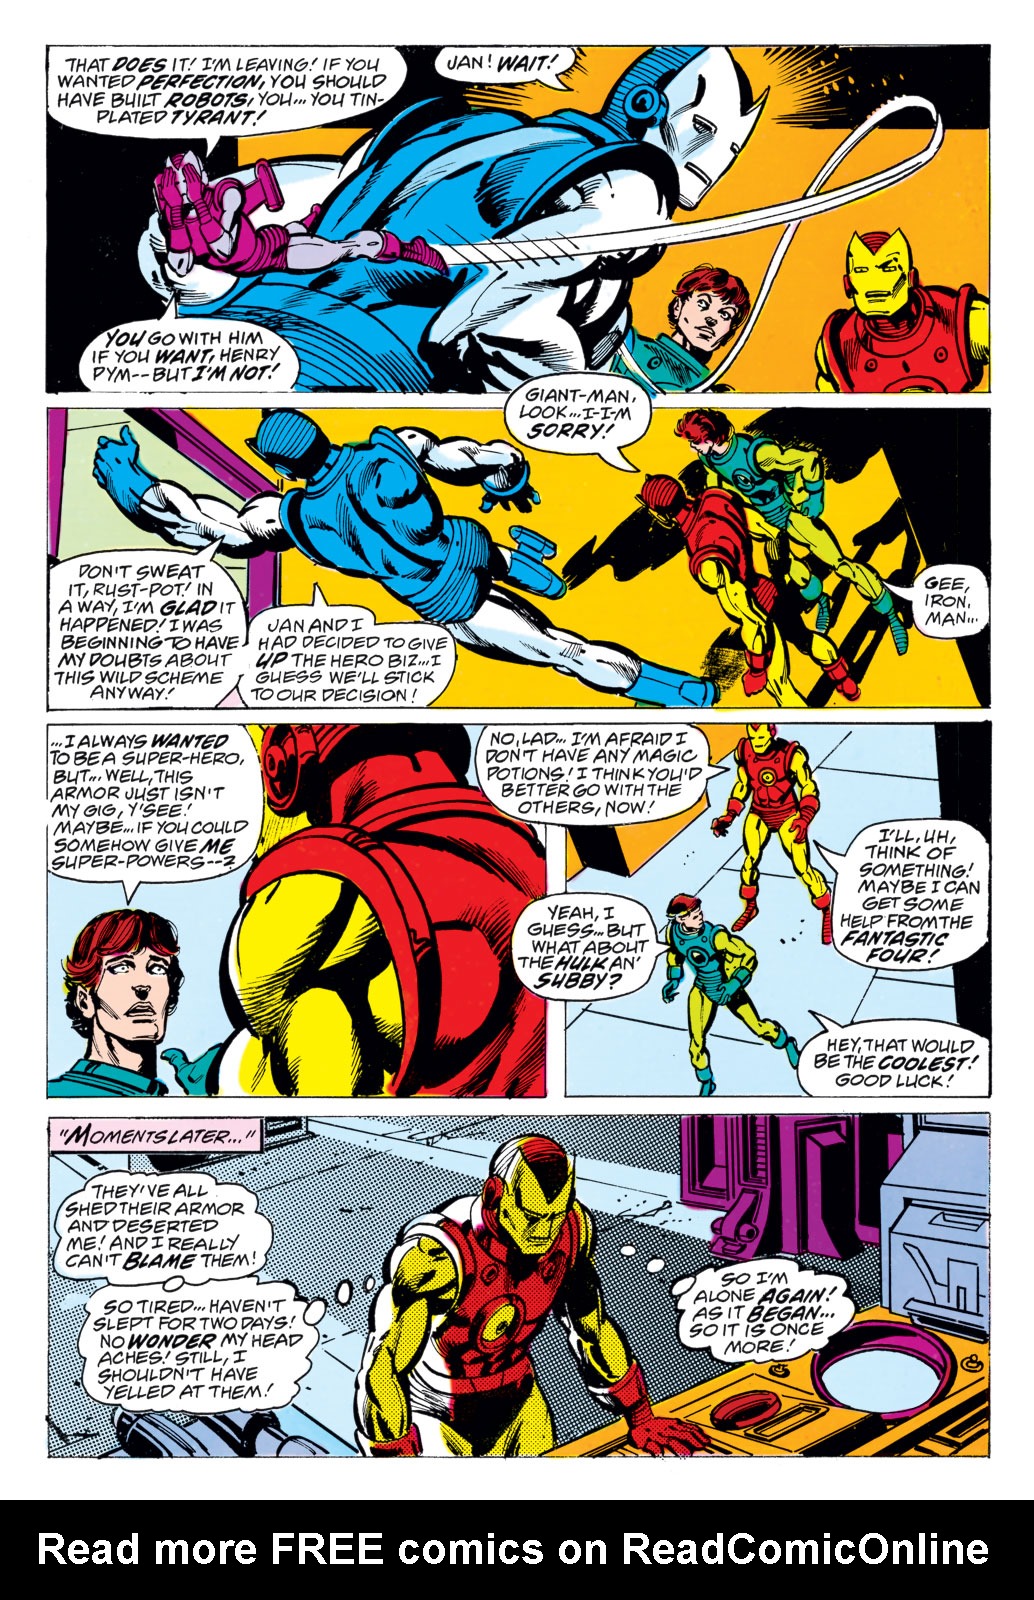 What If? (1977) issue 3 - The Avengers had never been - Page 14